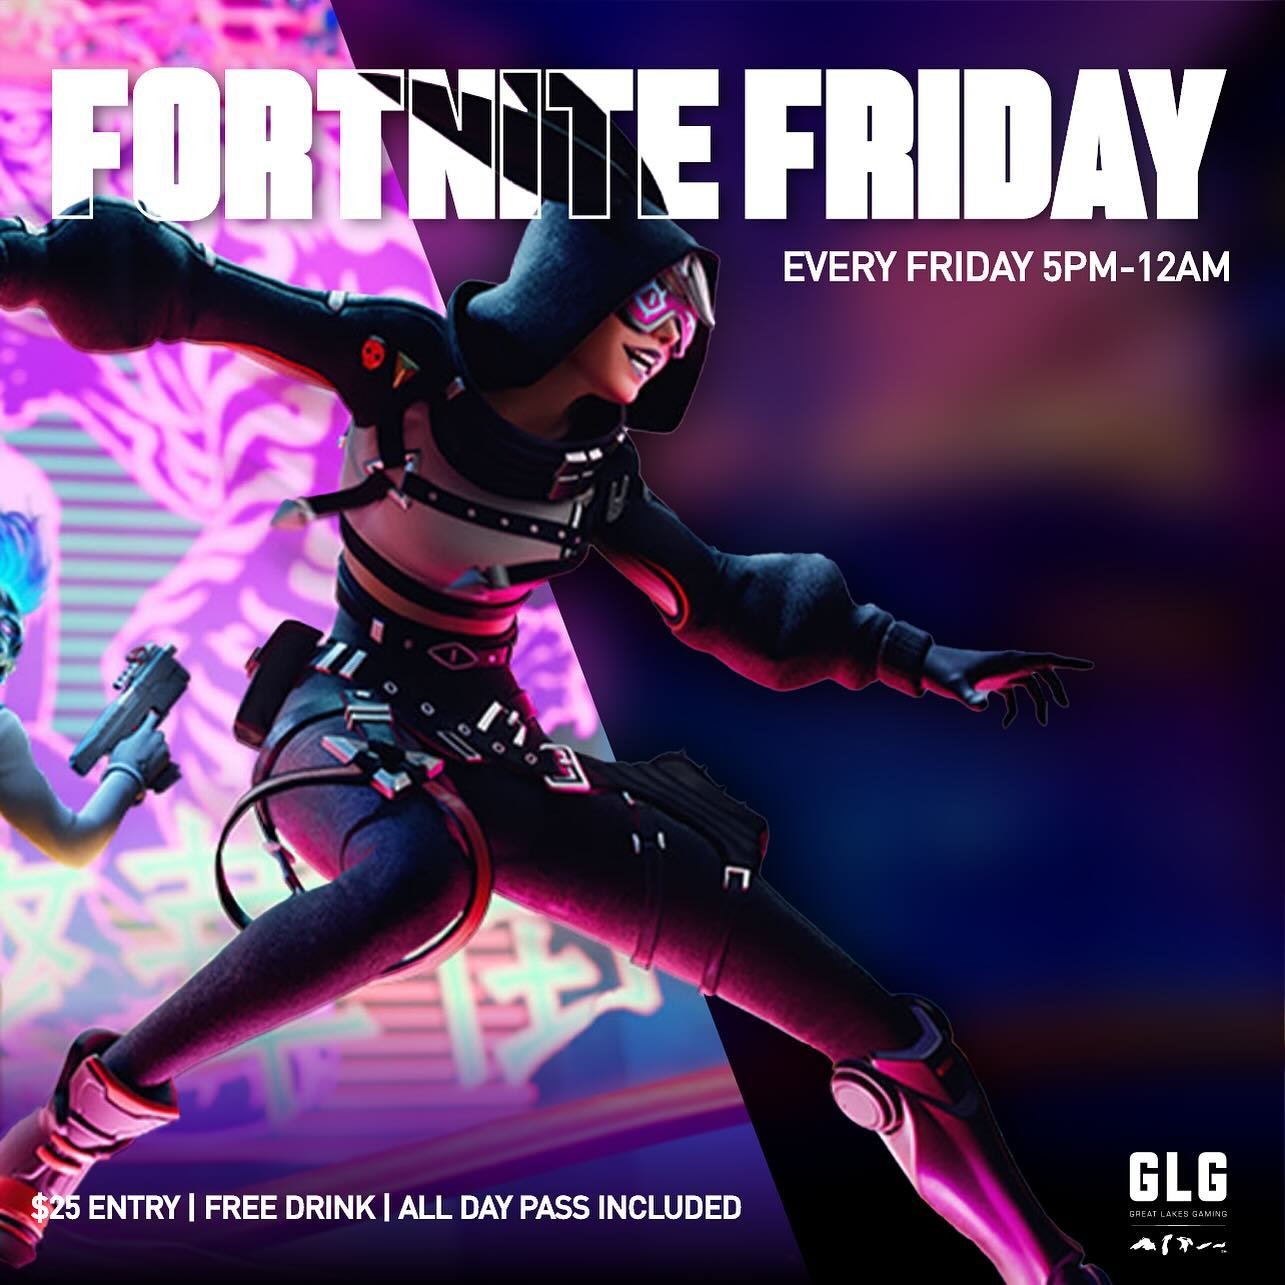 Fortnite Fridays is back and is happening EVERY FRIDAY! Join us in battle royale, box fights and just playing some good games #Rochester #rocny #rochesterny